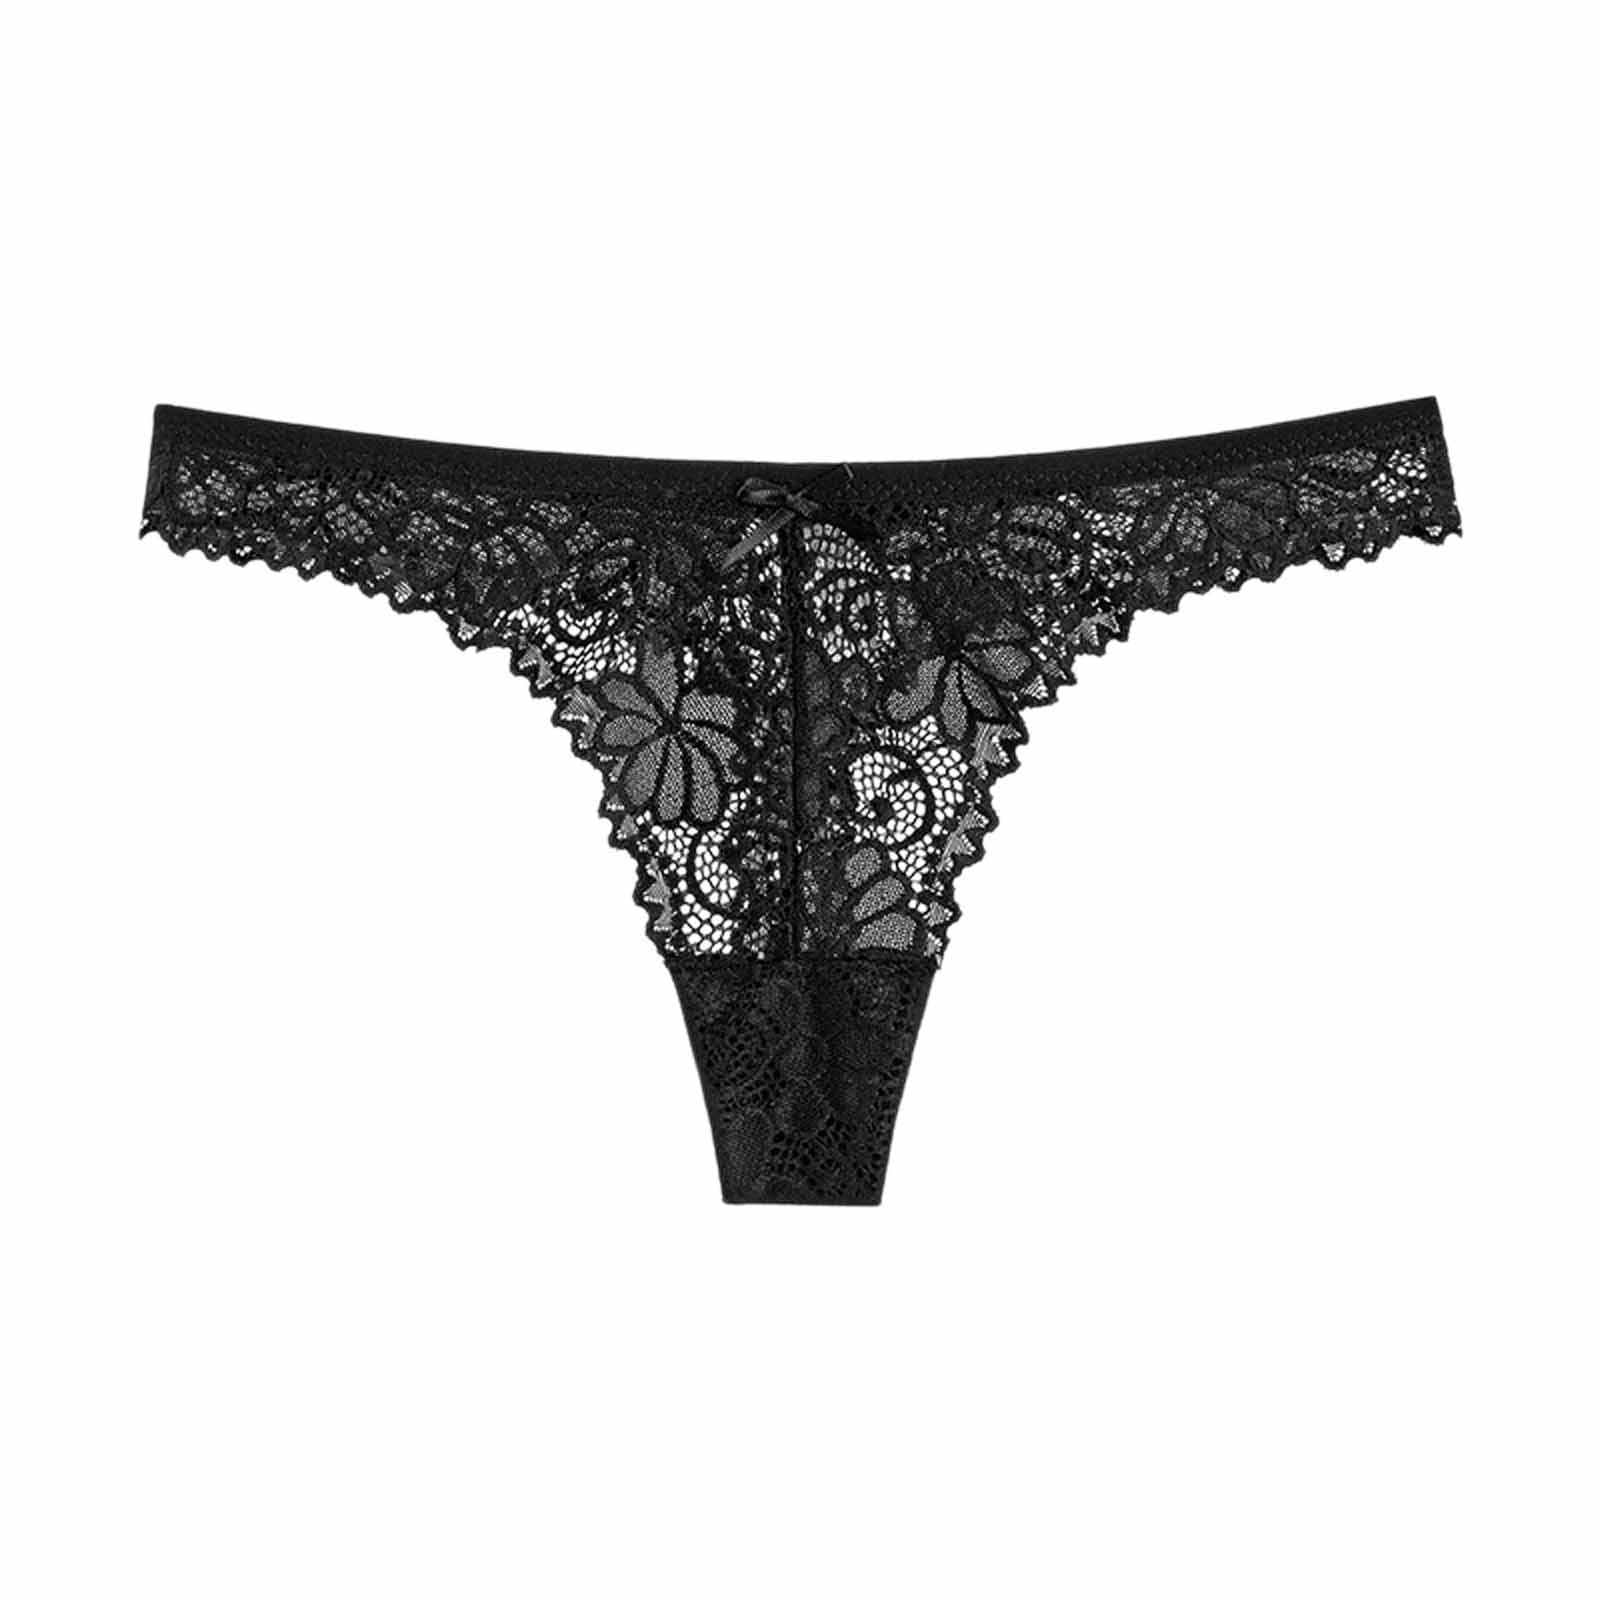 BELLZELY Shorts for Women Clearance Women Cute Lace Underwear Lingerie  Thongs Panties Ladies Hollow Out Underwear 